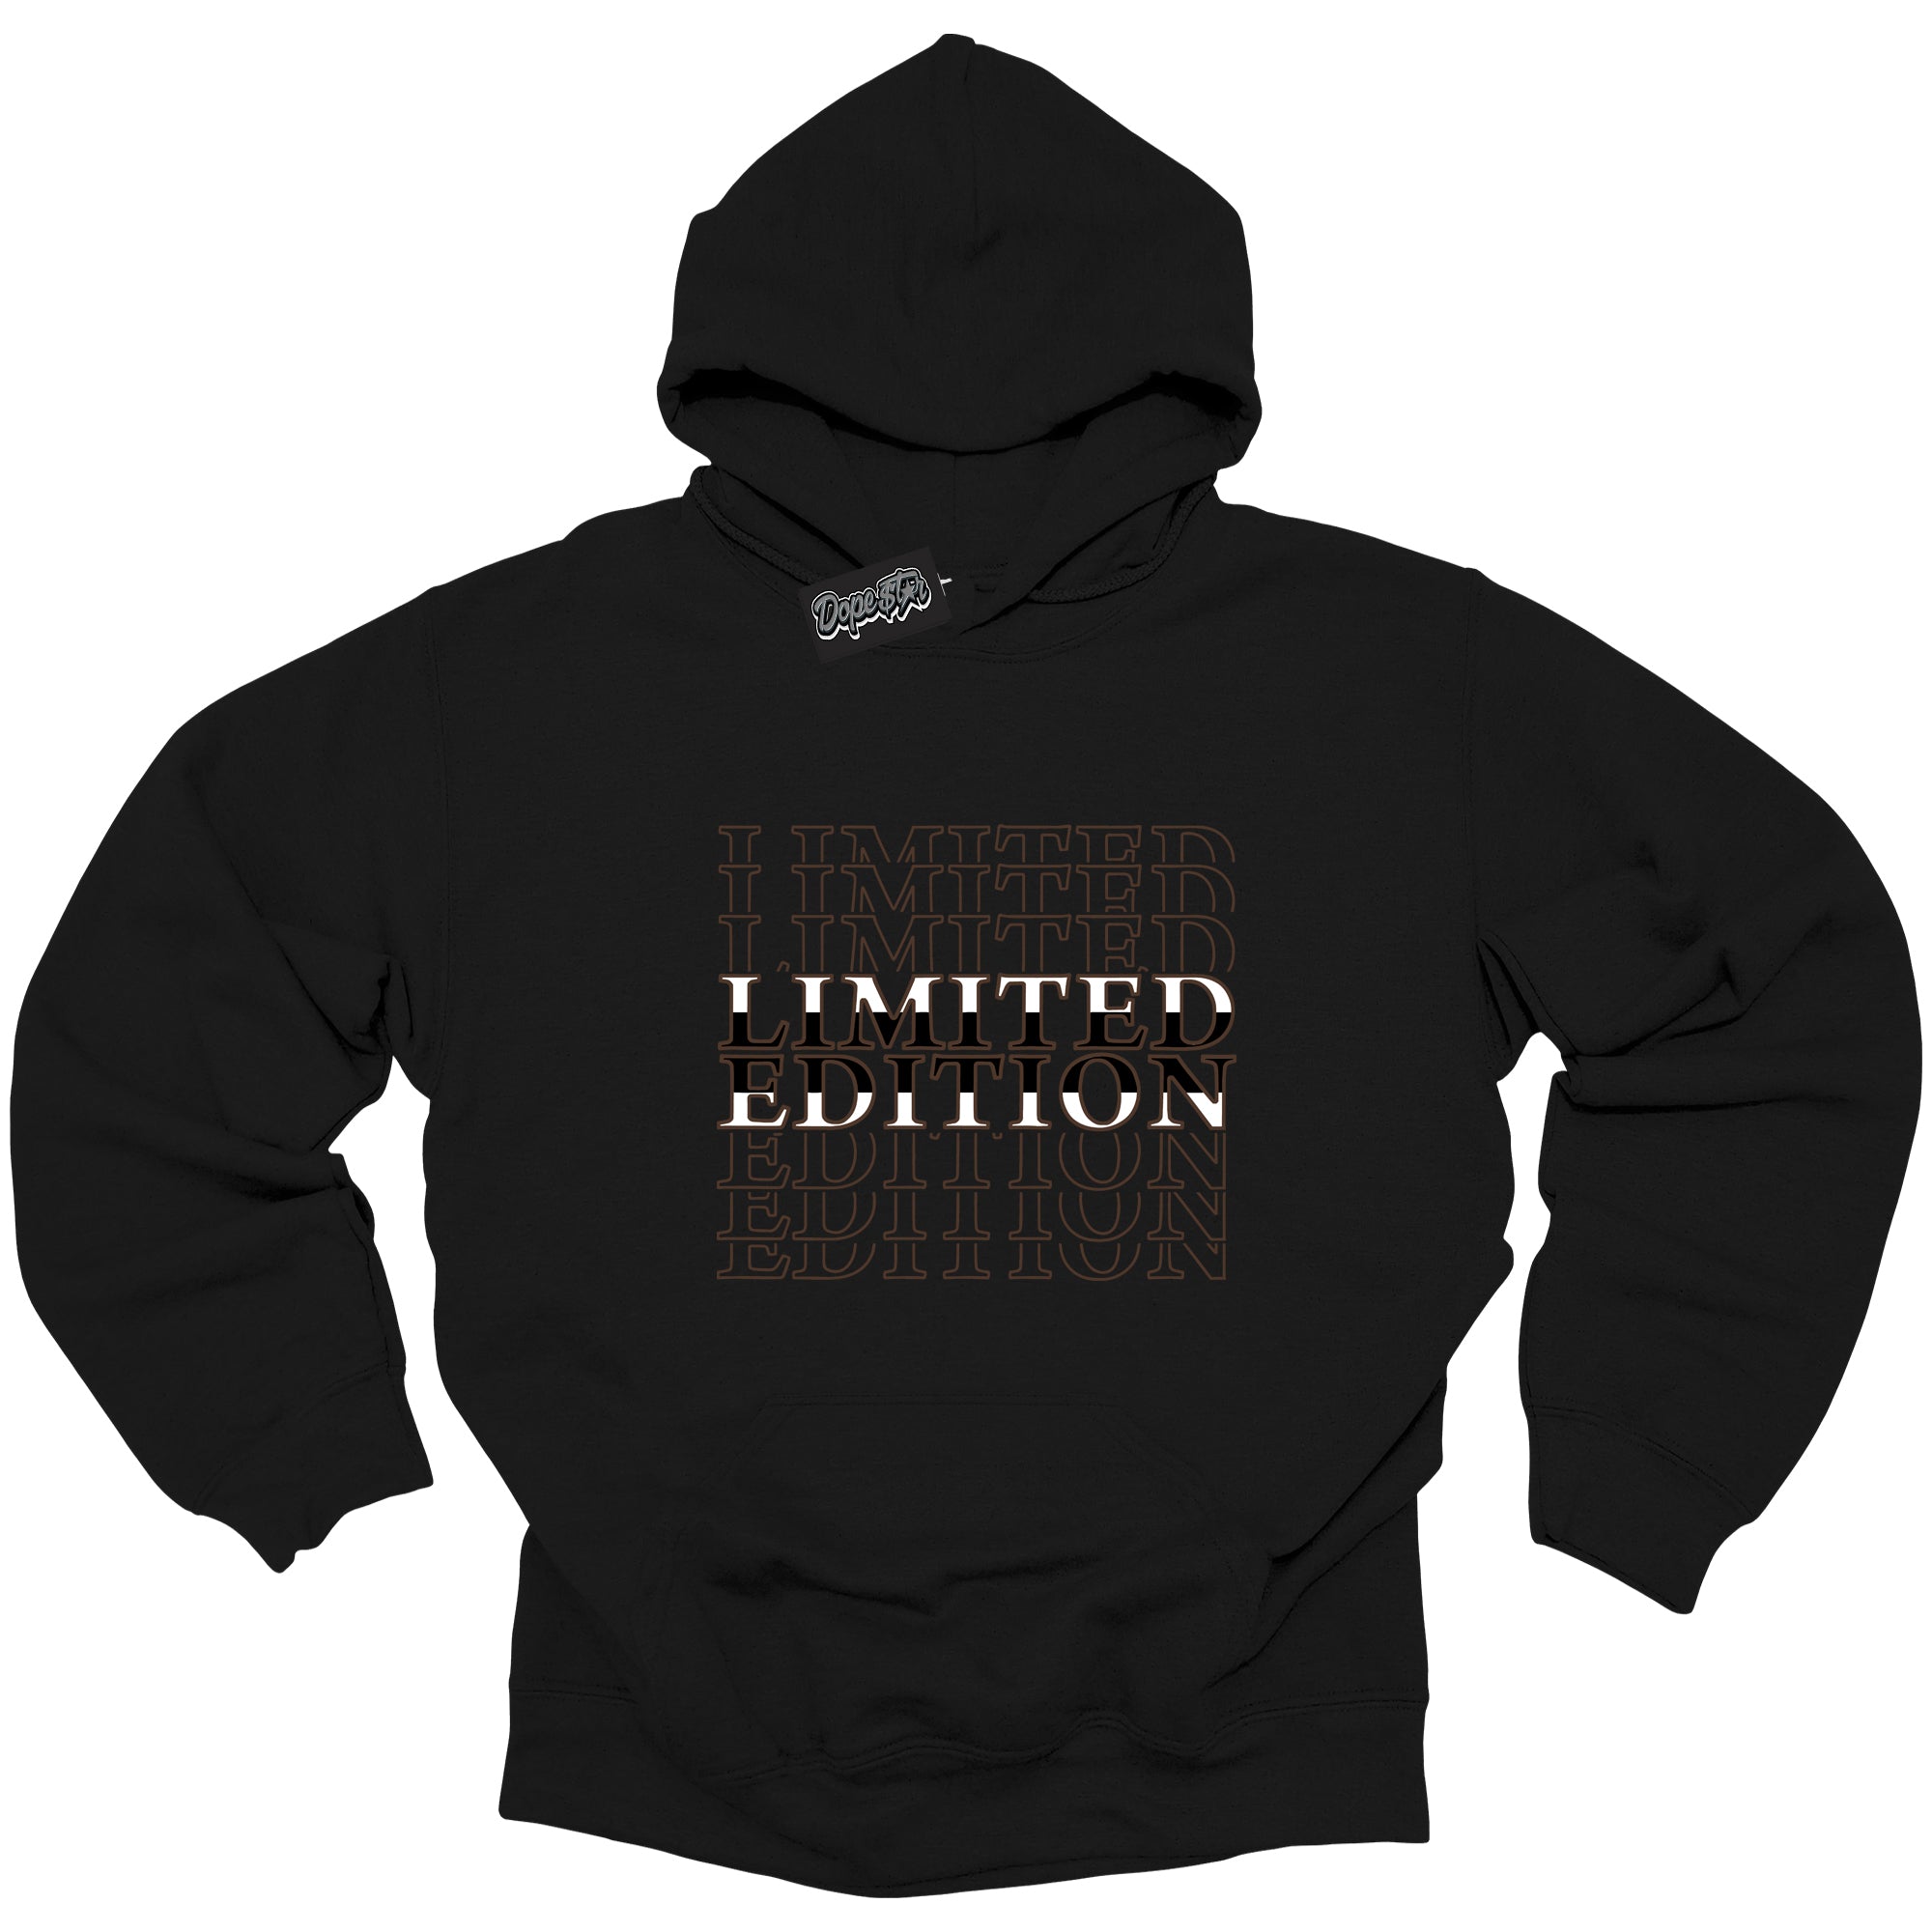 Cool Black Graphic Dope`Star Hoodie with “ Limited Edition “ print, that perfectly matches Palomino 1s sneakers